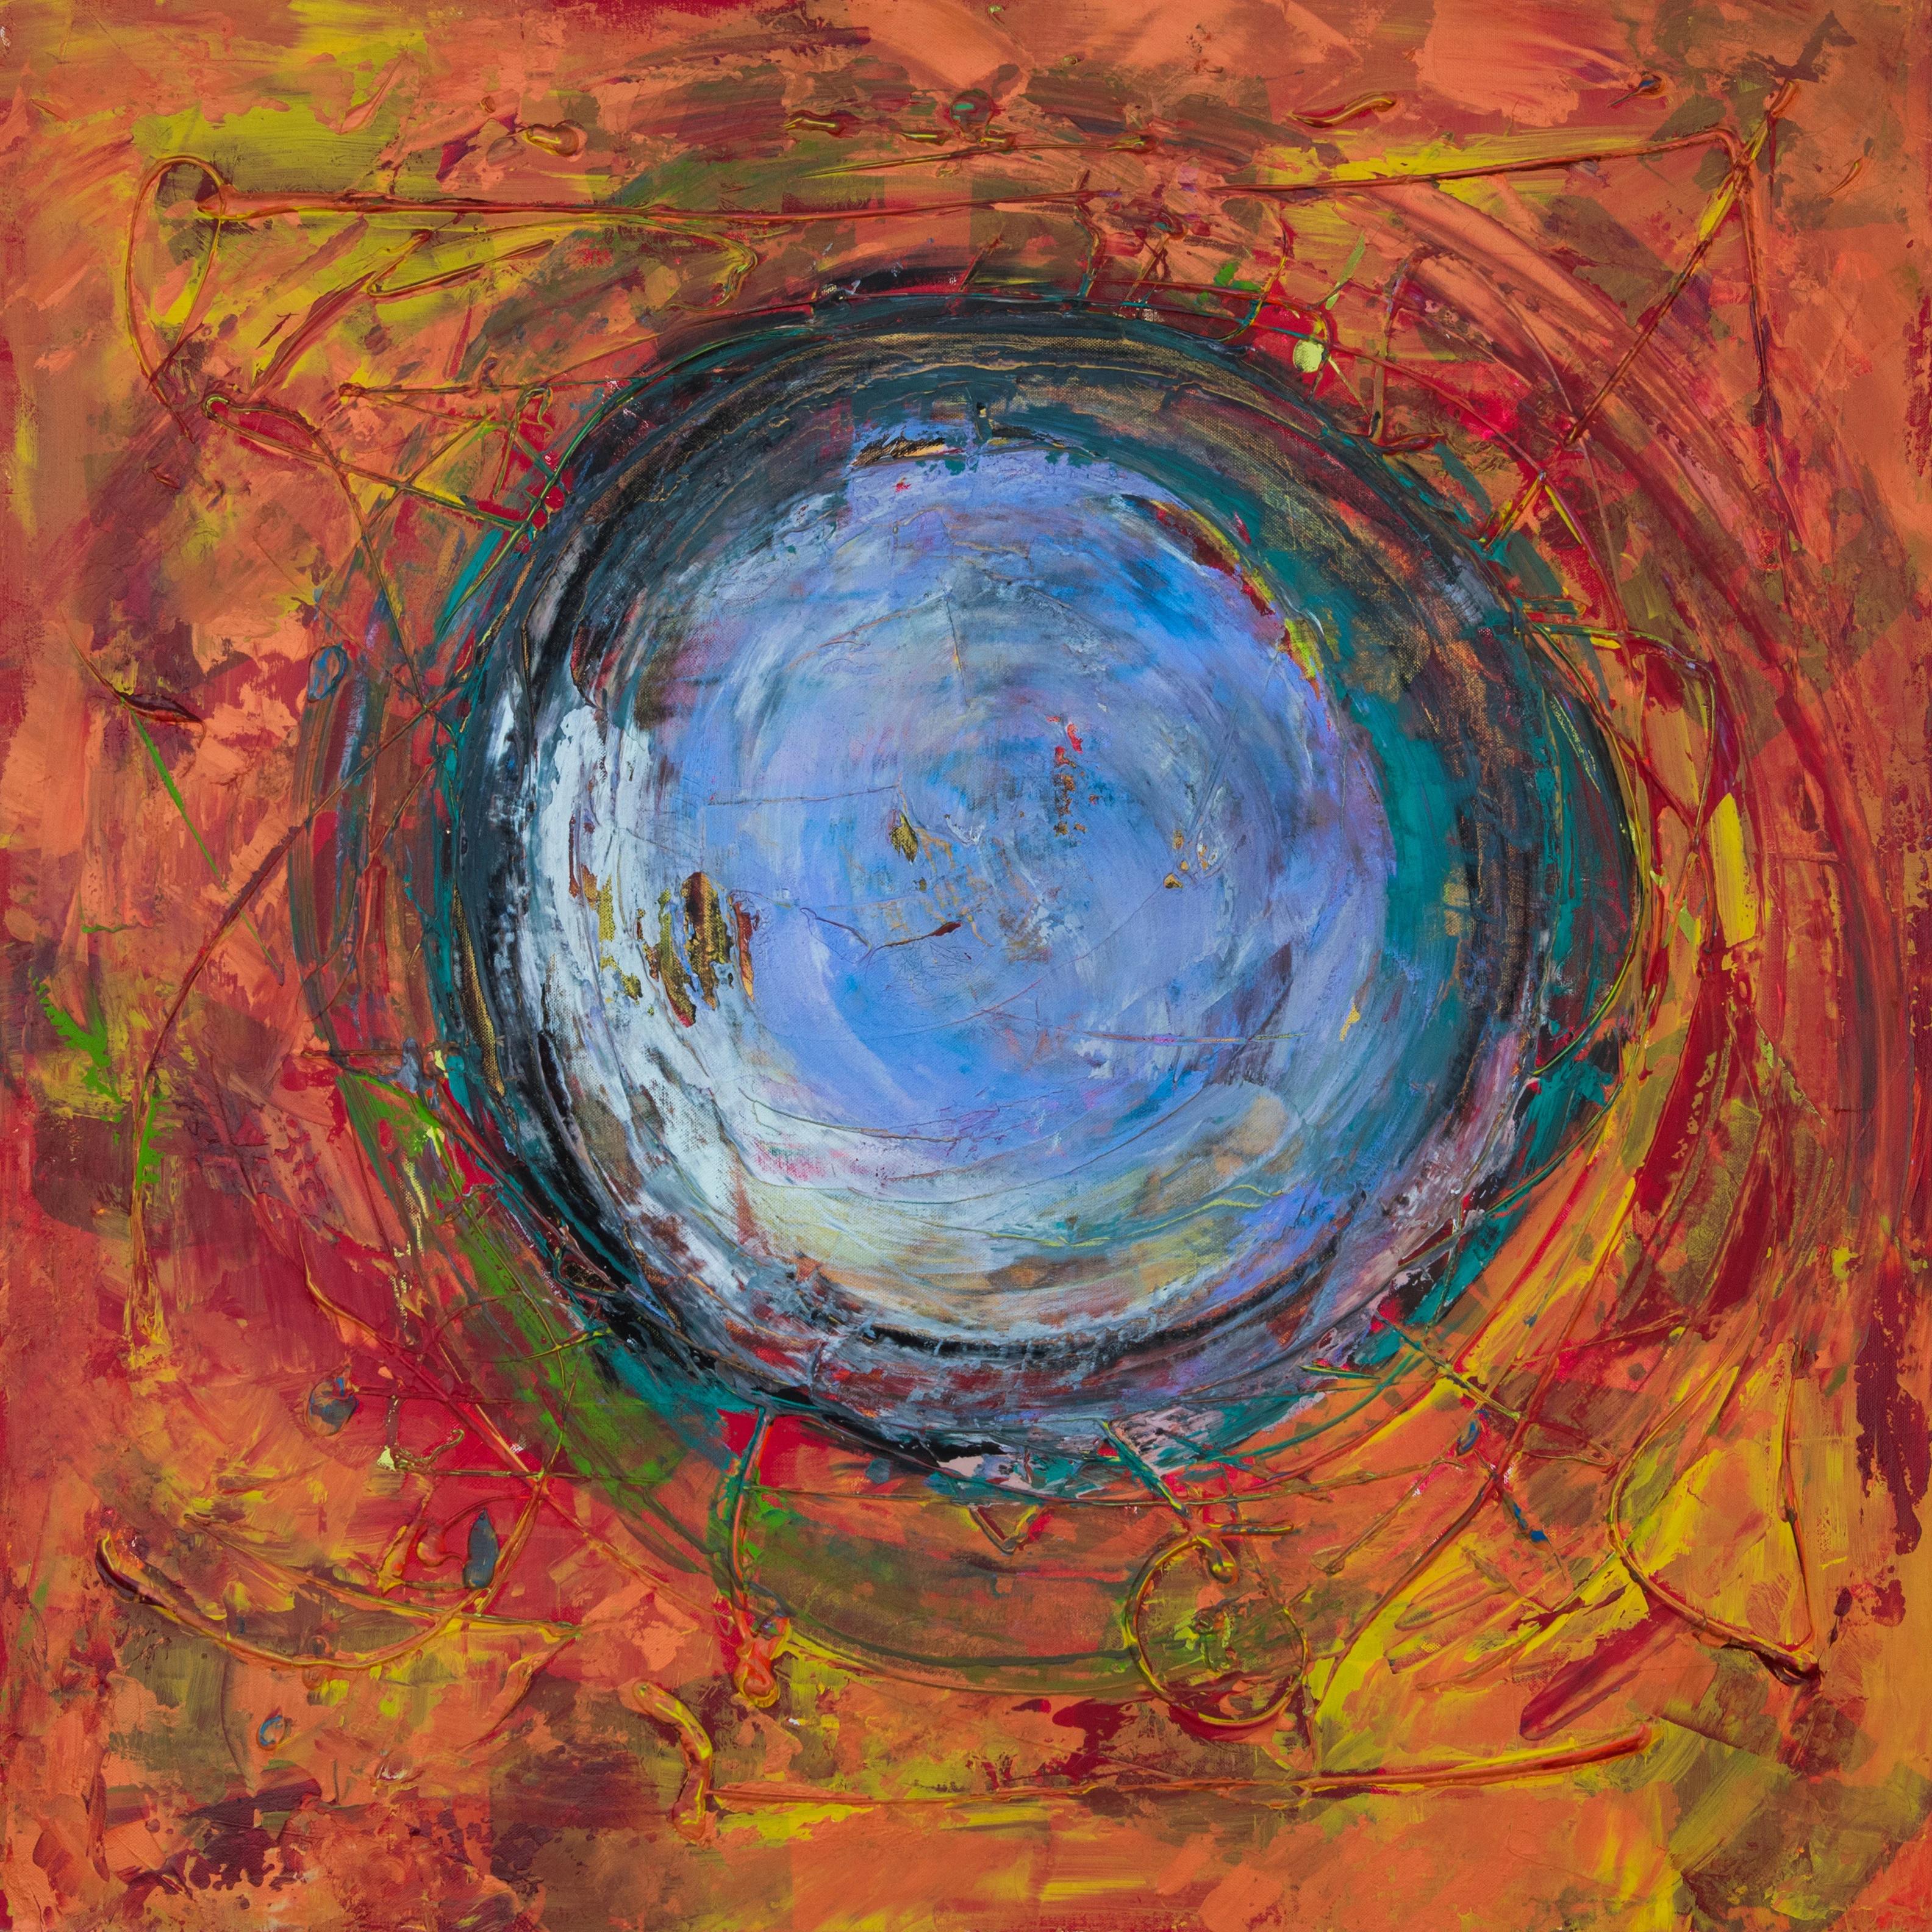 "Vortex" Abstract Painting 39" x 39" inch by Ahmed Farid 

Born in Cairo, Egypt, in 1950 where he currently lives and works, Farid is an autodidact Egyptian painters who trained privately in immersion apprenticeship in established artists’